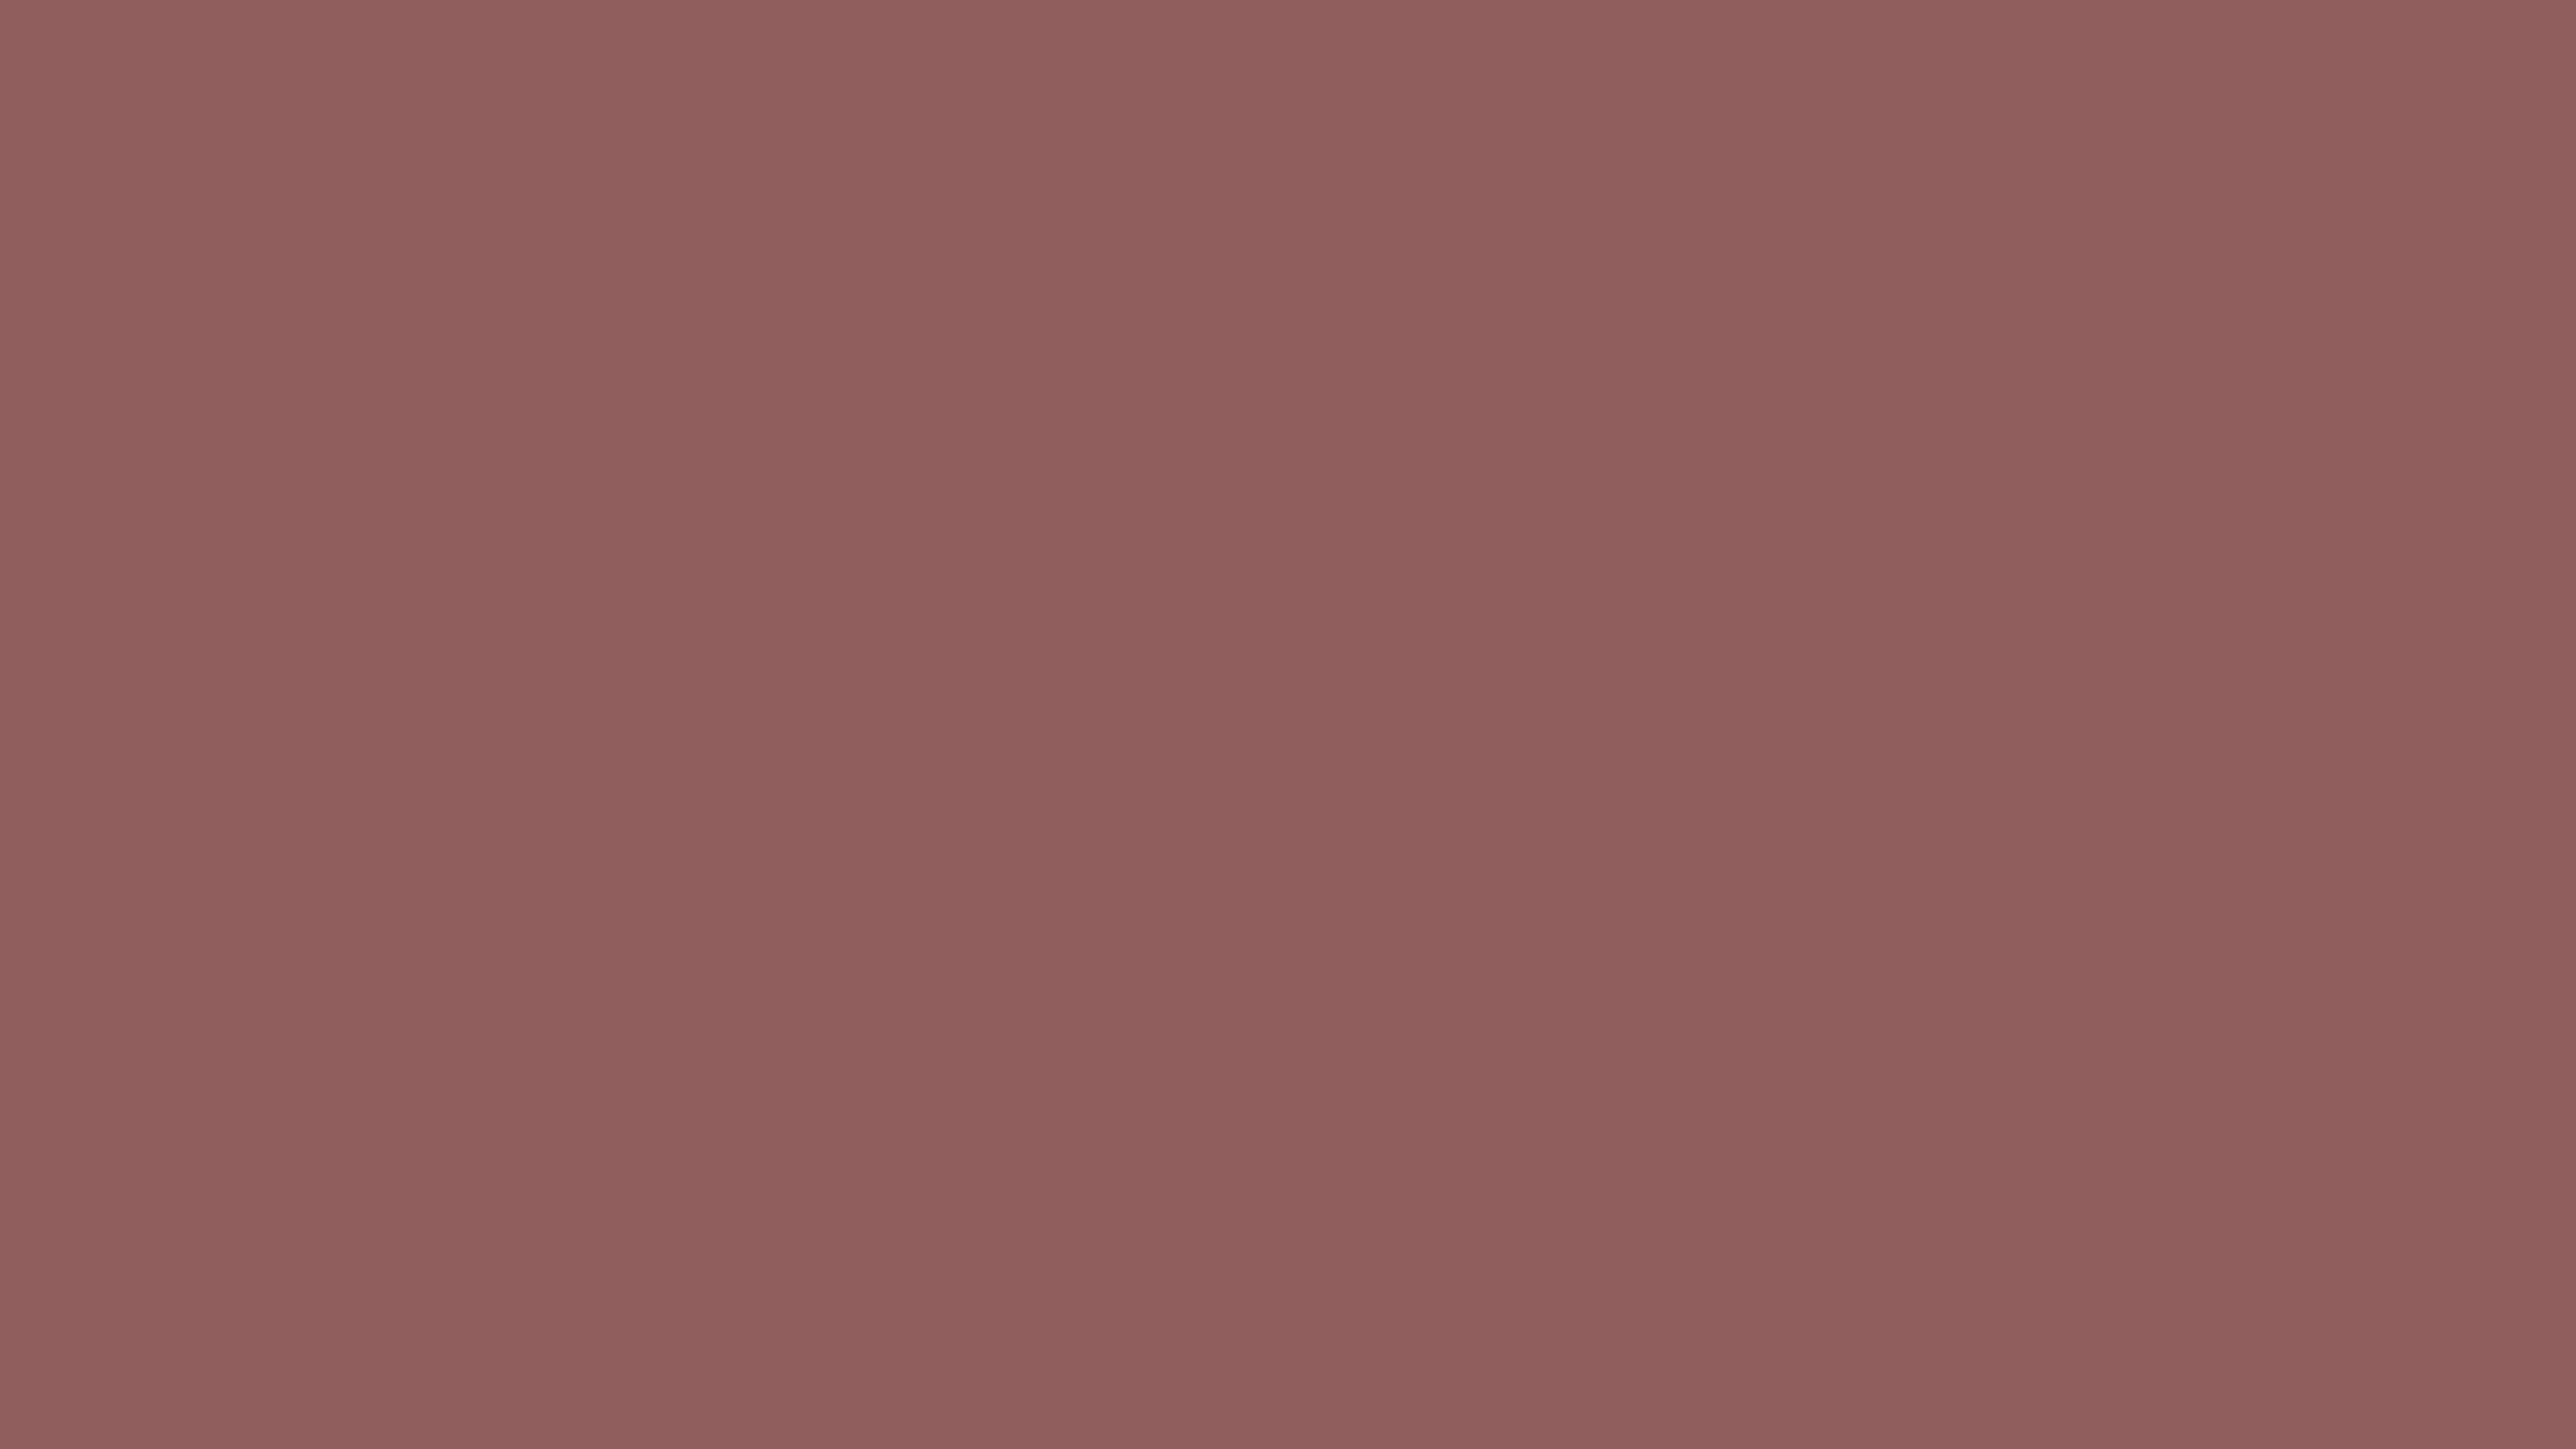 7680x4320 Rose Taupe Solid Color Background